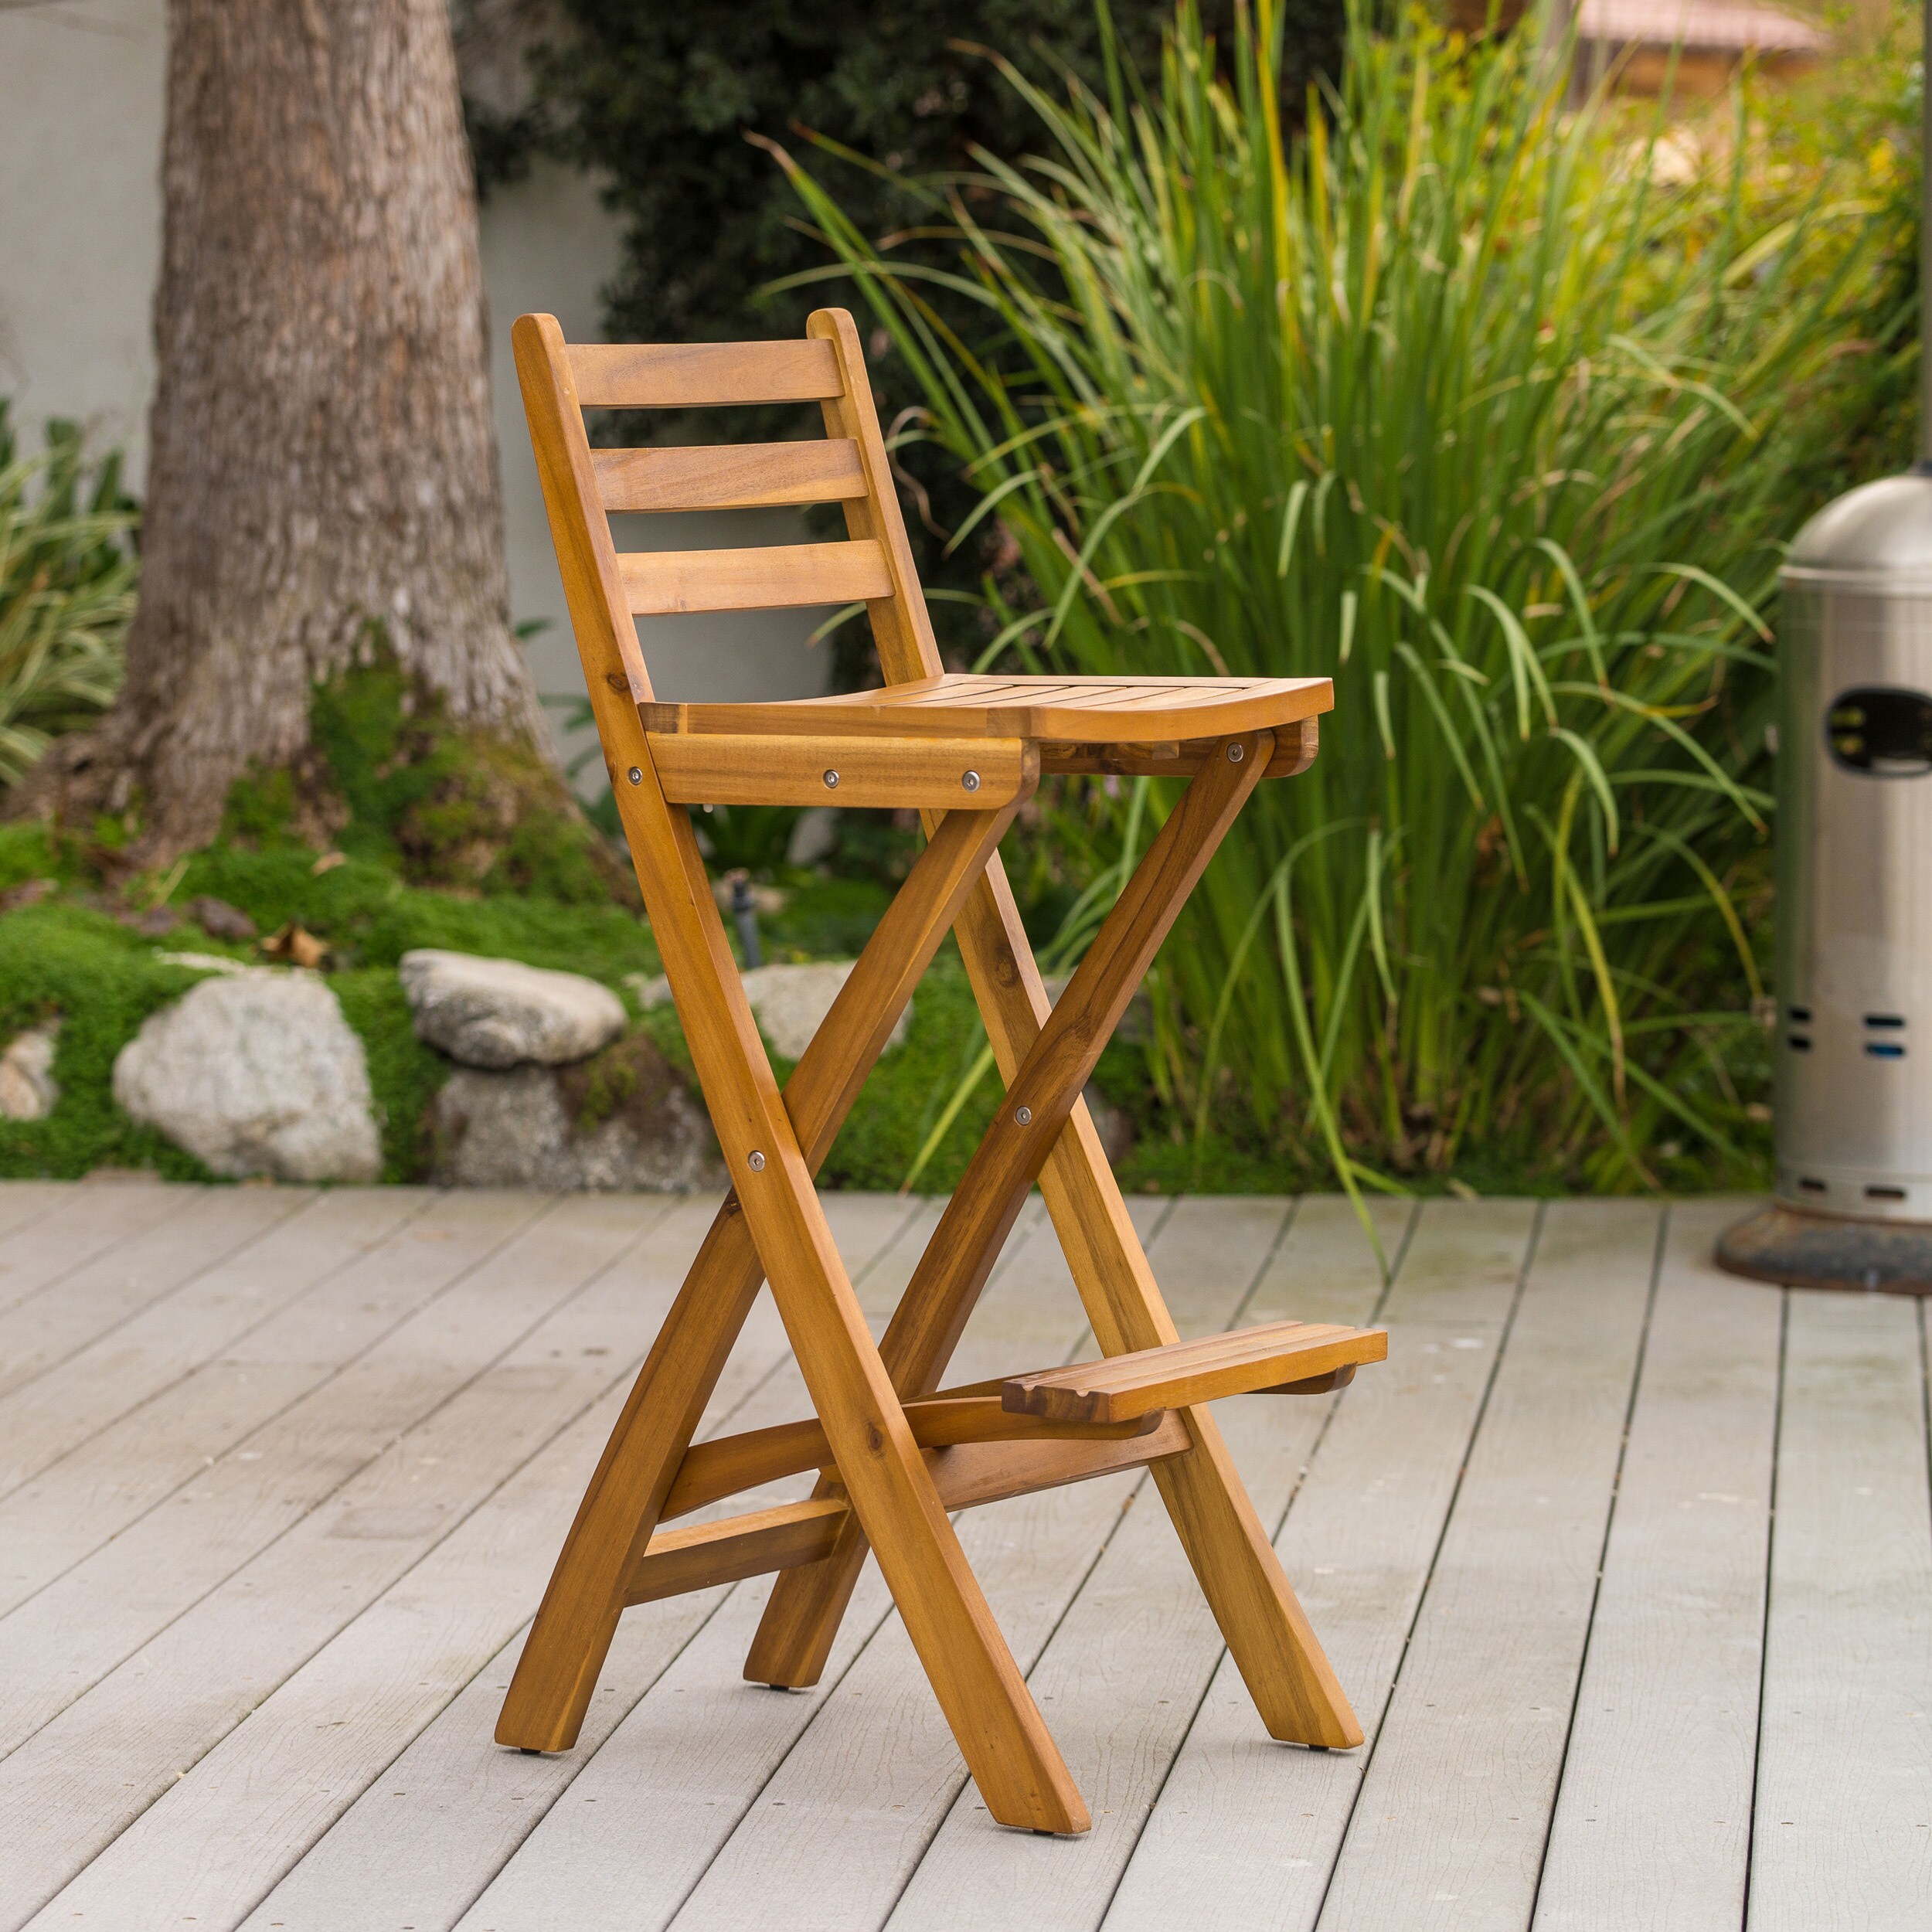 Christopher Knight Home Tundra Outdoor Wood Barstool (NaturalIncludes One (1) barstoolFoldable for easy storageSturdy constructionNeutral colors to match any outdoor decorIdeal for entertaining guests at your indoor or outdoor bar area Dimensions 41 inc